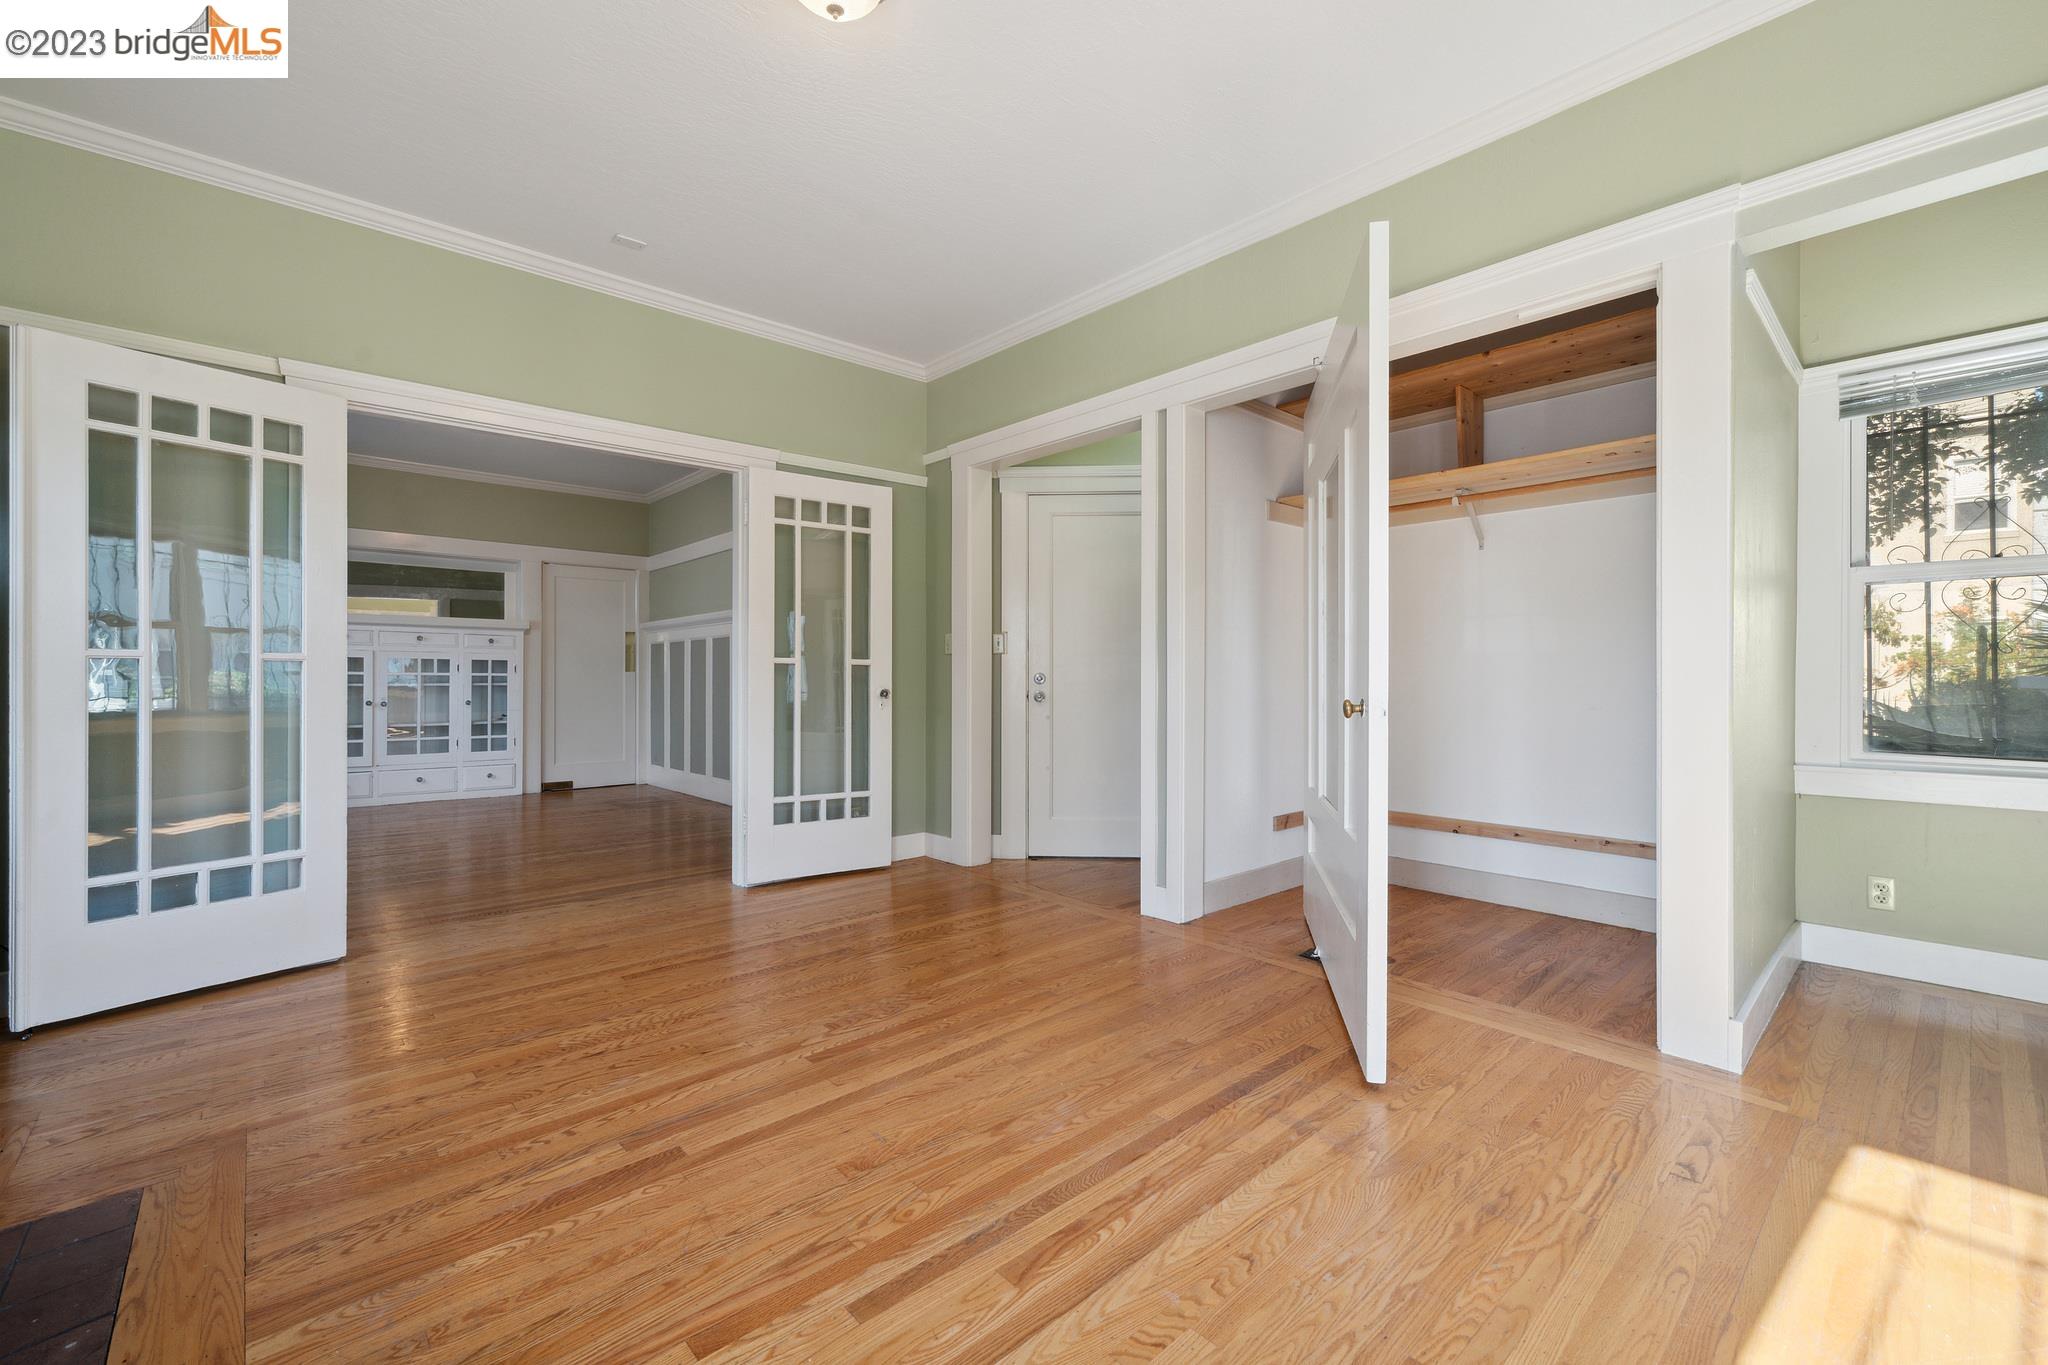 a view of empty room with wooden floor